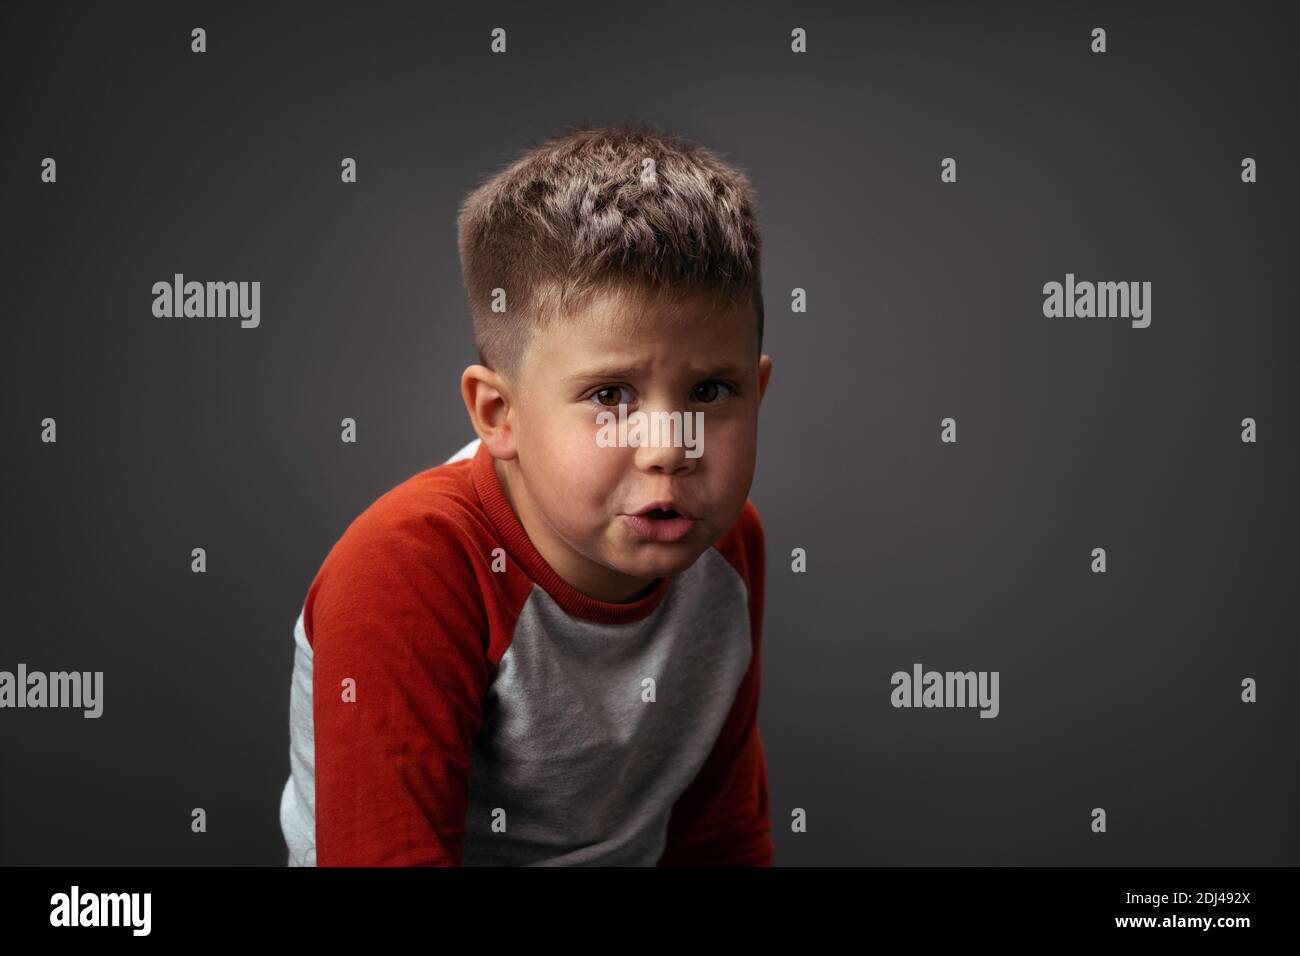 Cute little boy in red and white t-shirt posing on gray background. Facial expressions, emotions, feelings. Photo of a preschooler 6 years old on a Stock Photo